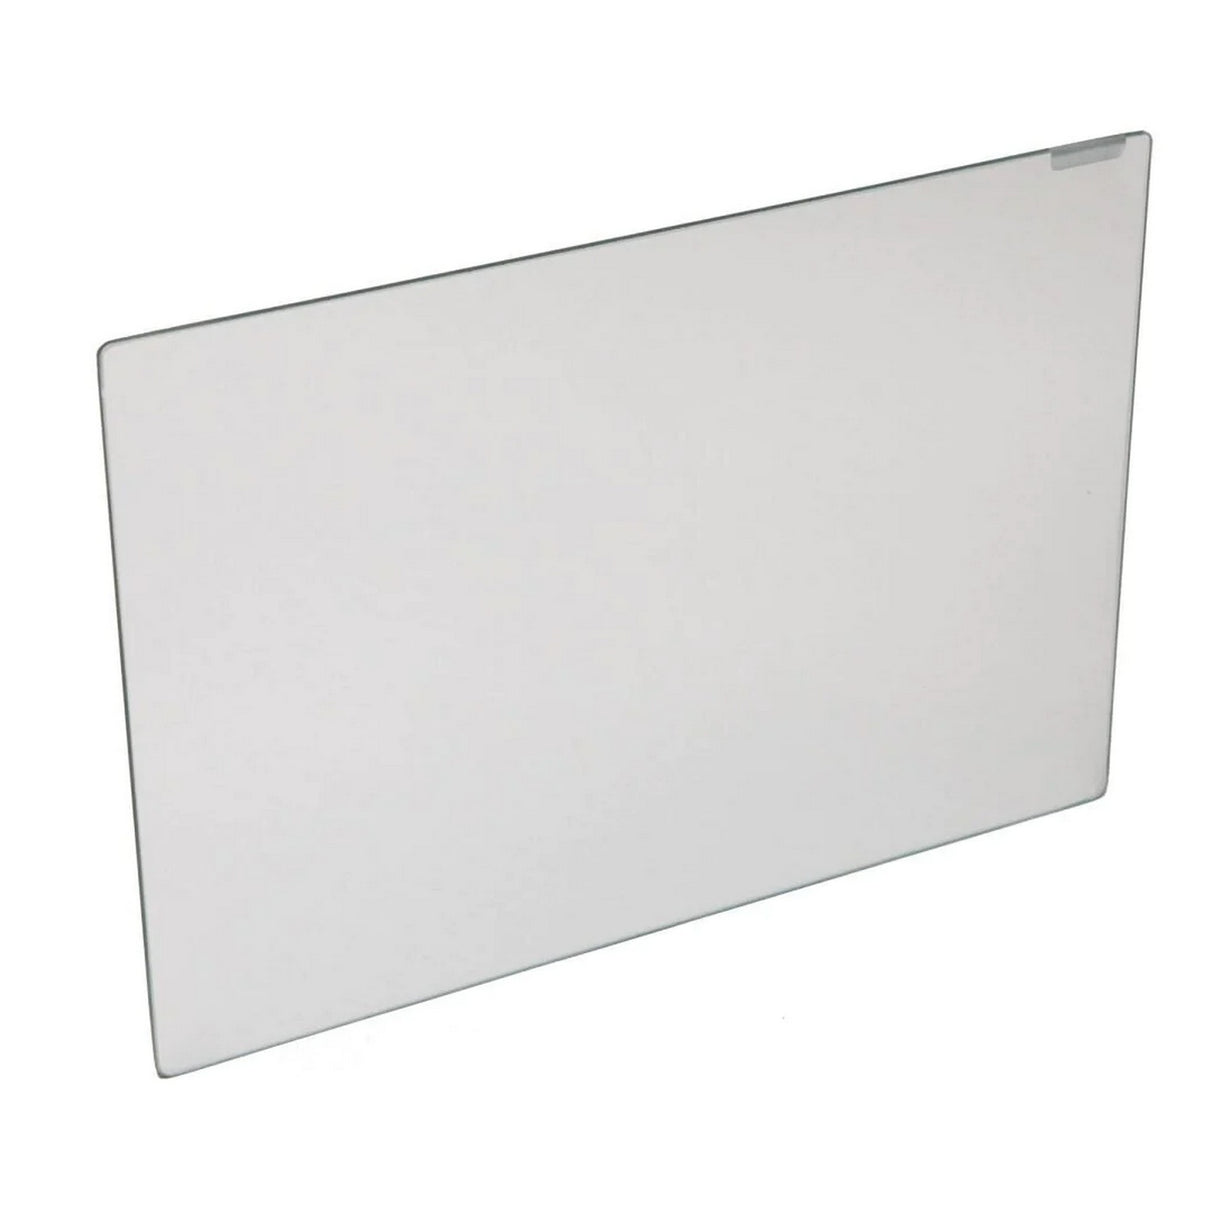 PrimeLight Design VB1-024 Replacement Beamsplitter/Two-Way Mirror Glass for VoxBox Pro